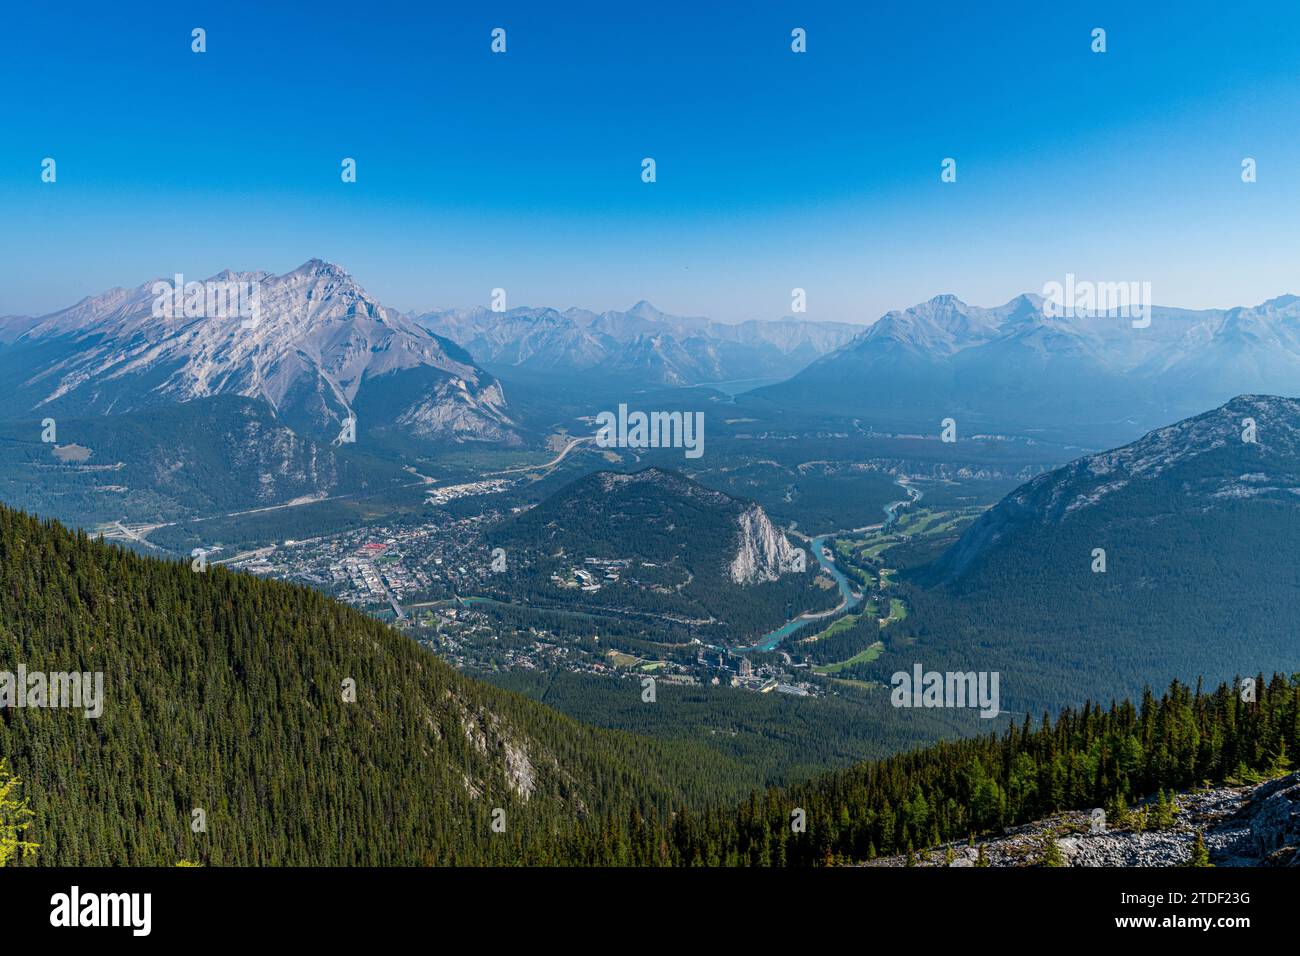 Mountain view from Sulphur Mountain top, Banff National Park, UNESCO World Heritage Site, Alberta, Rocky Mountains, Canada, North America Stock Photo